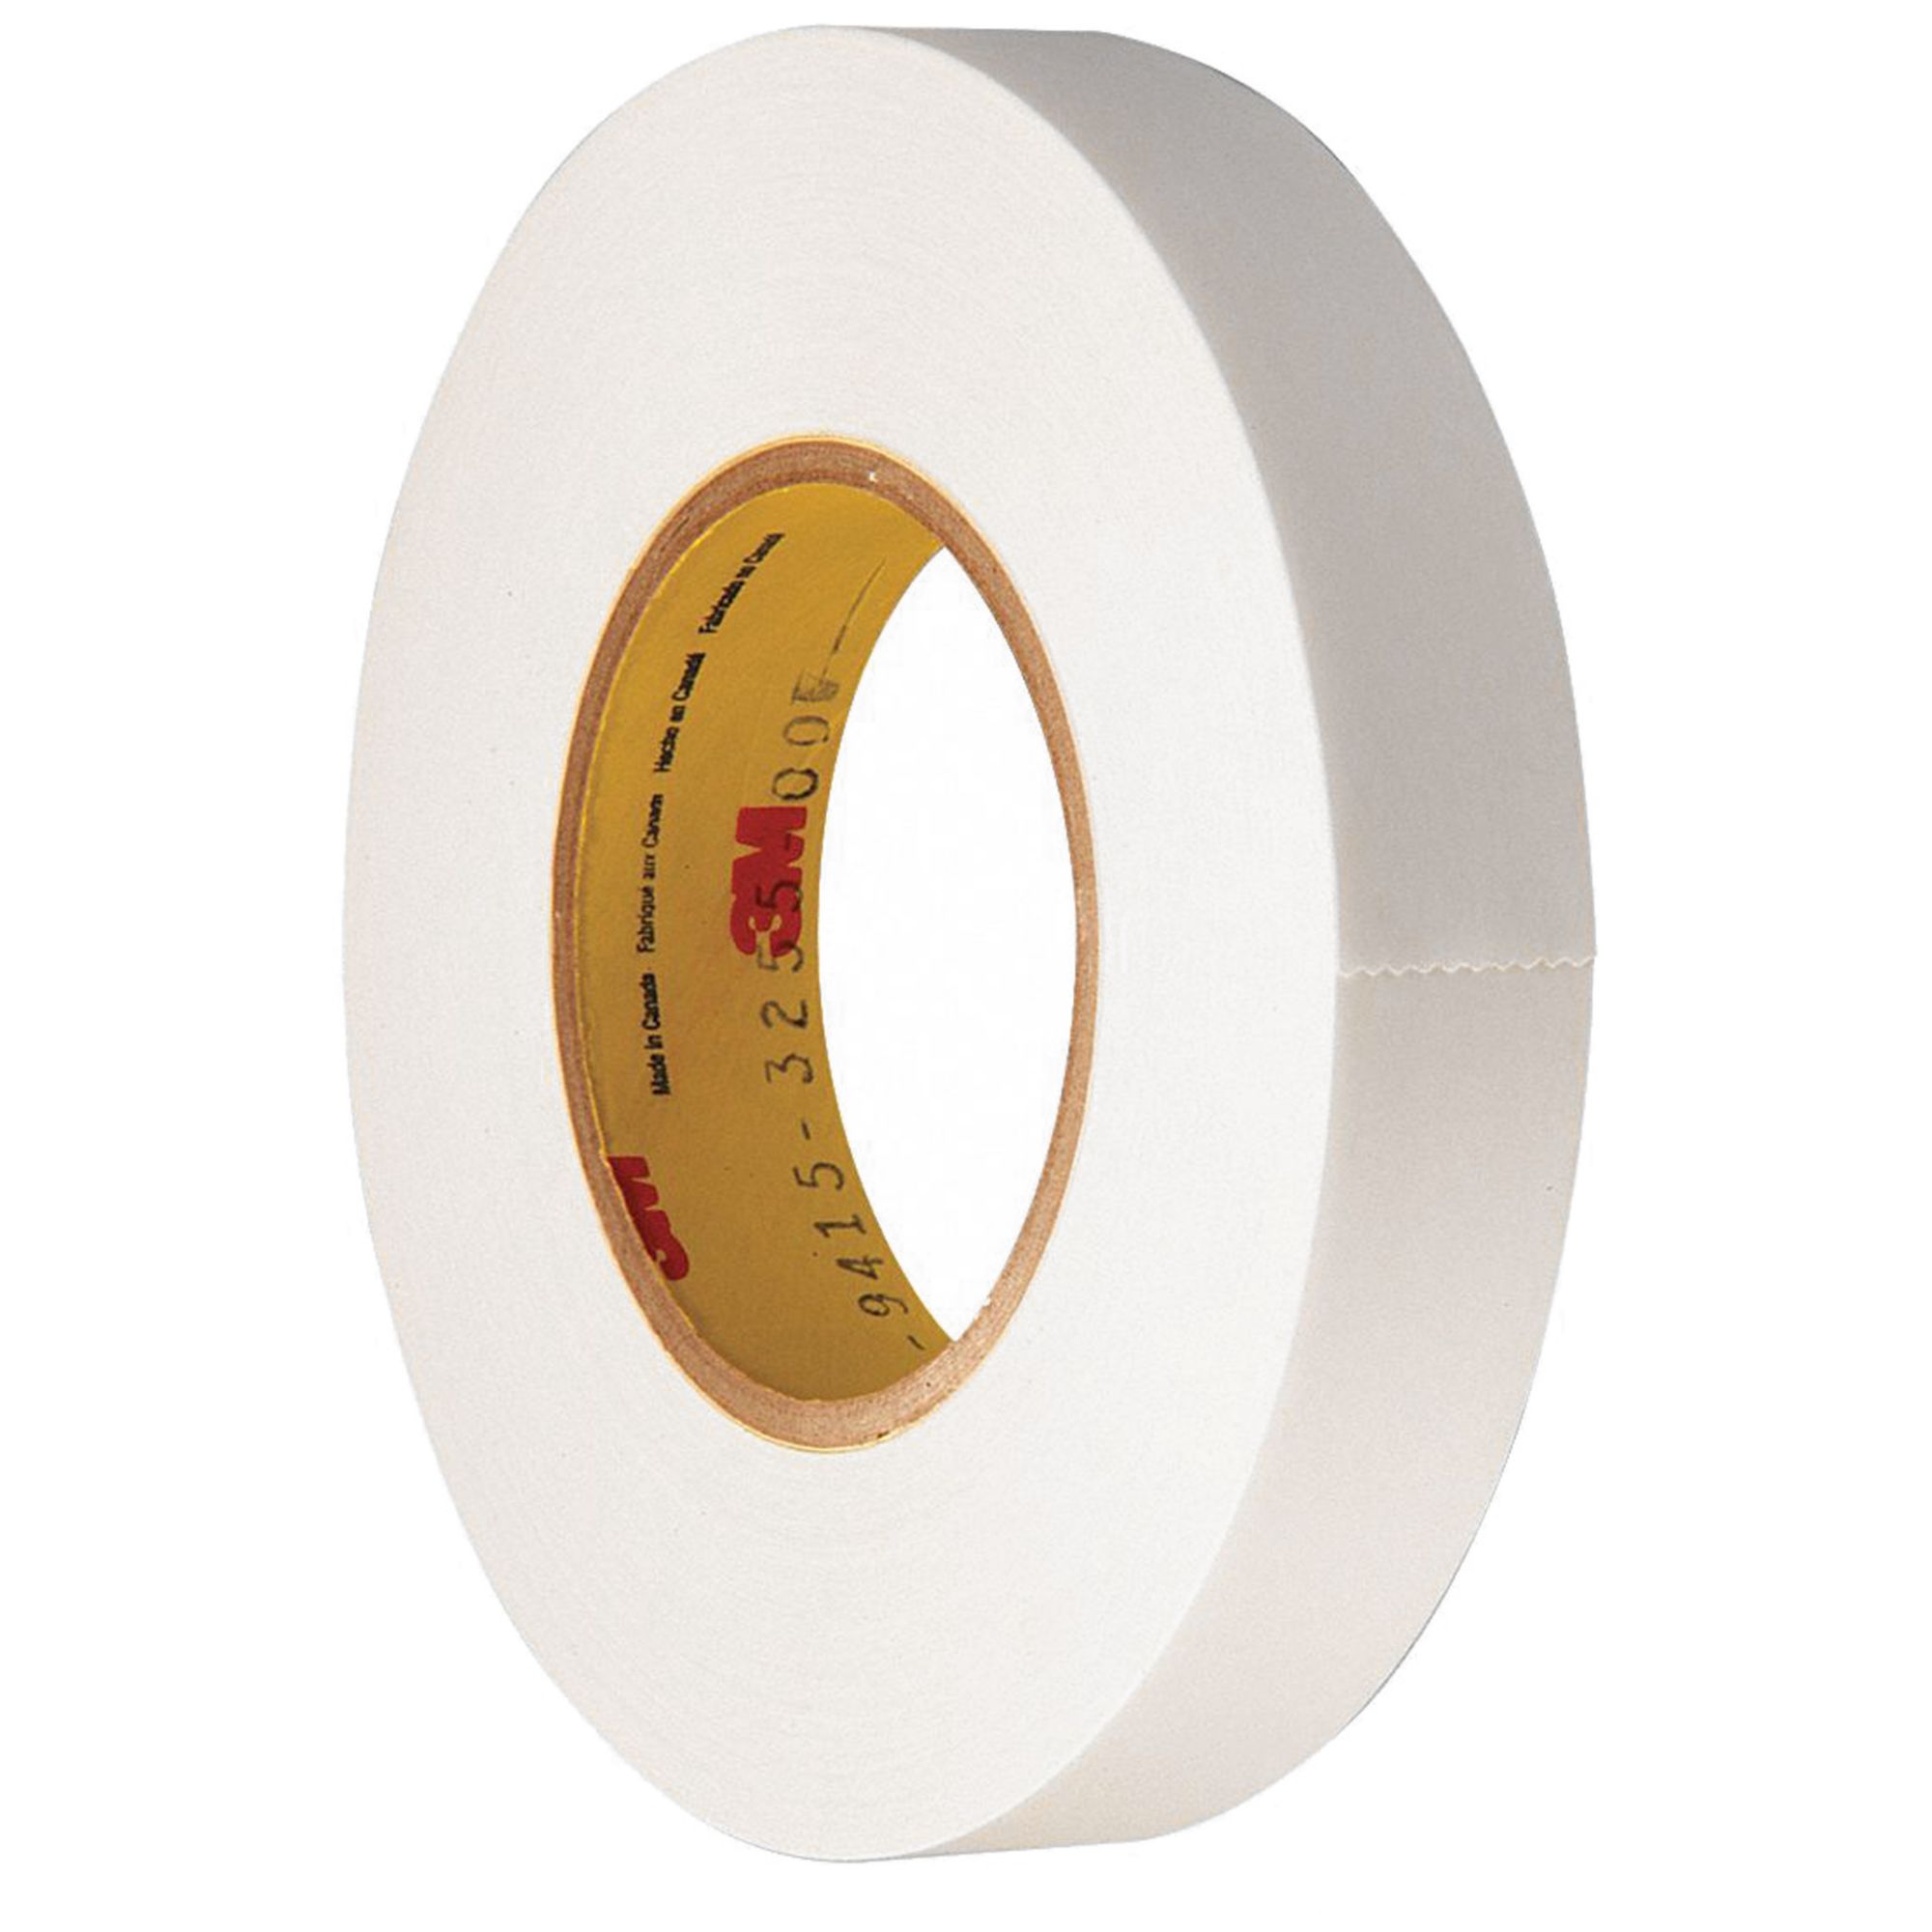 Double Sided Film Tape - 1/2 x 60 yds. for $1.73 Online